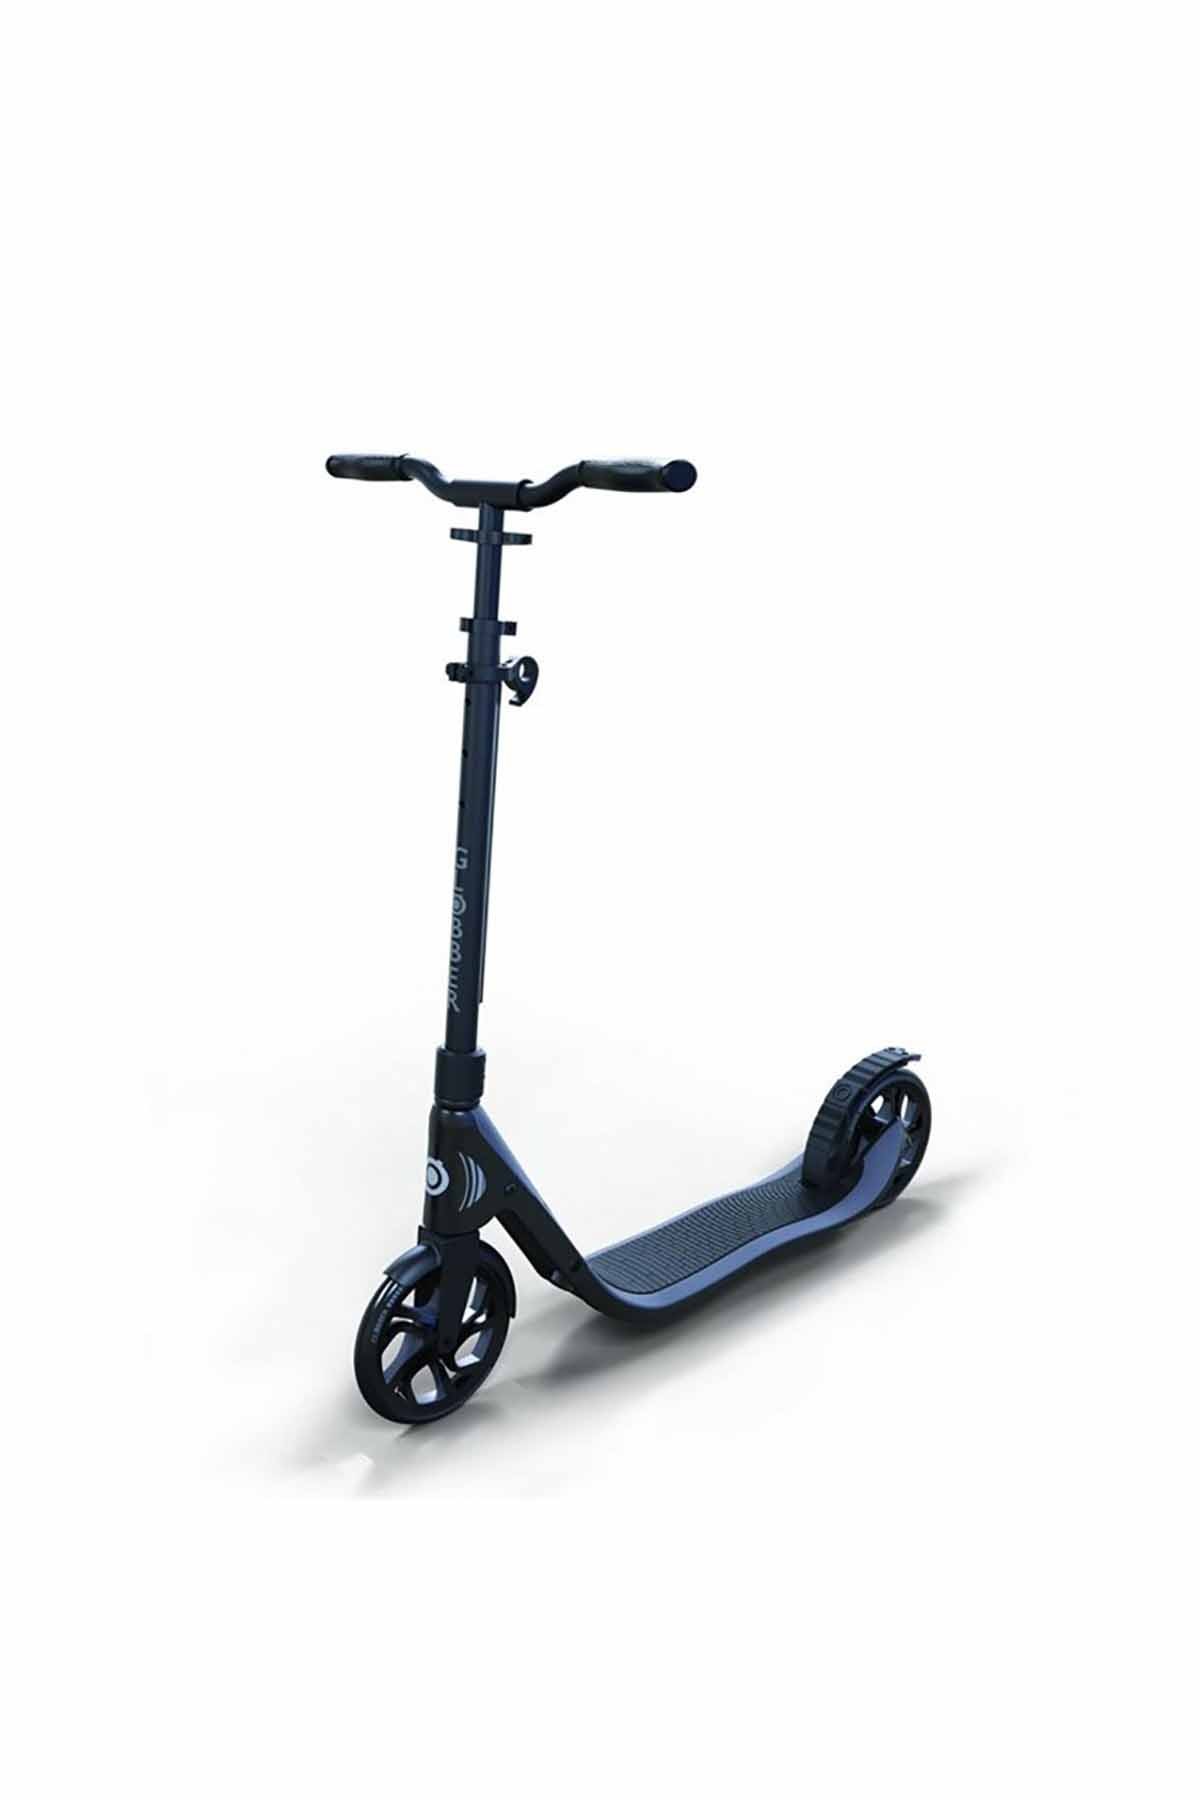 Globber Scooter One NL 205 Siyah Gri